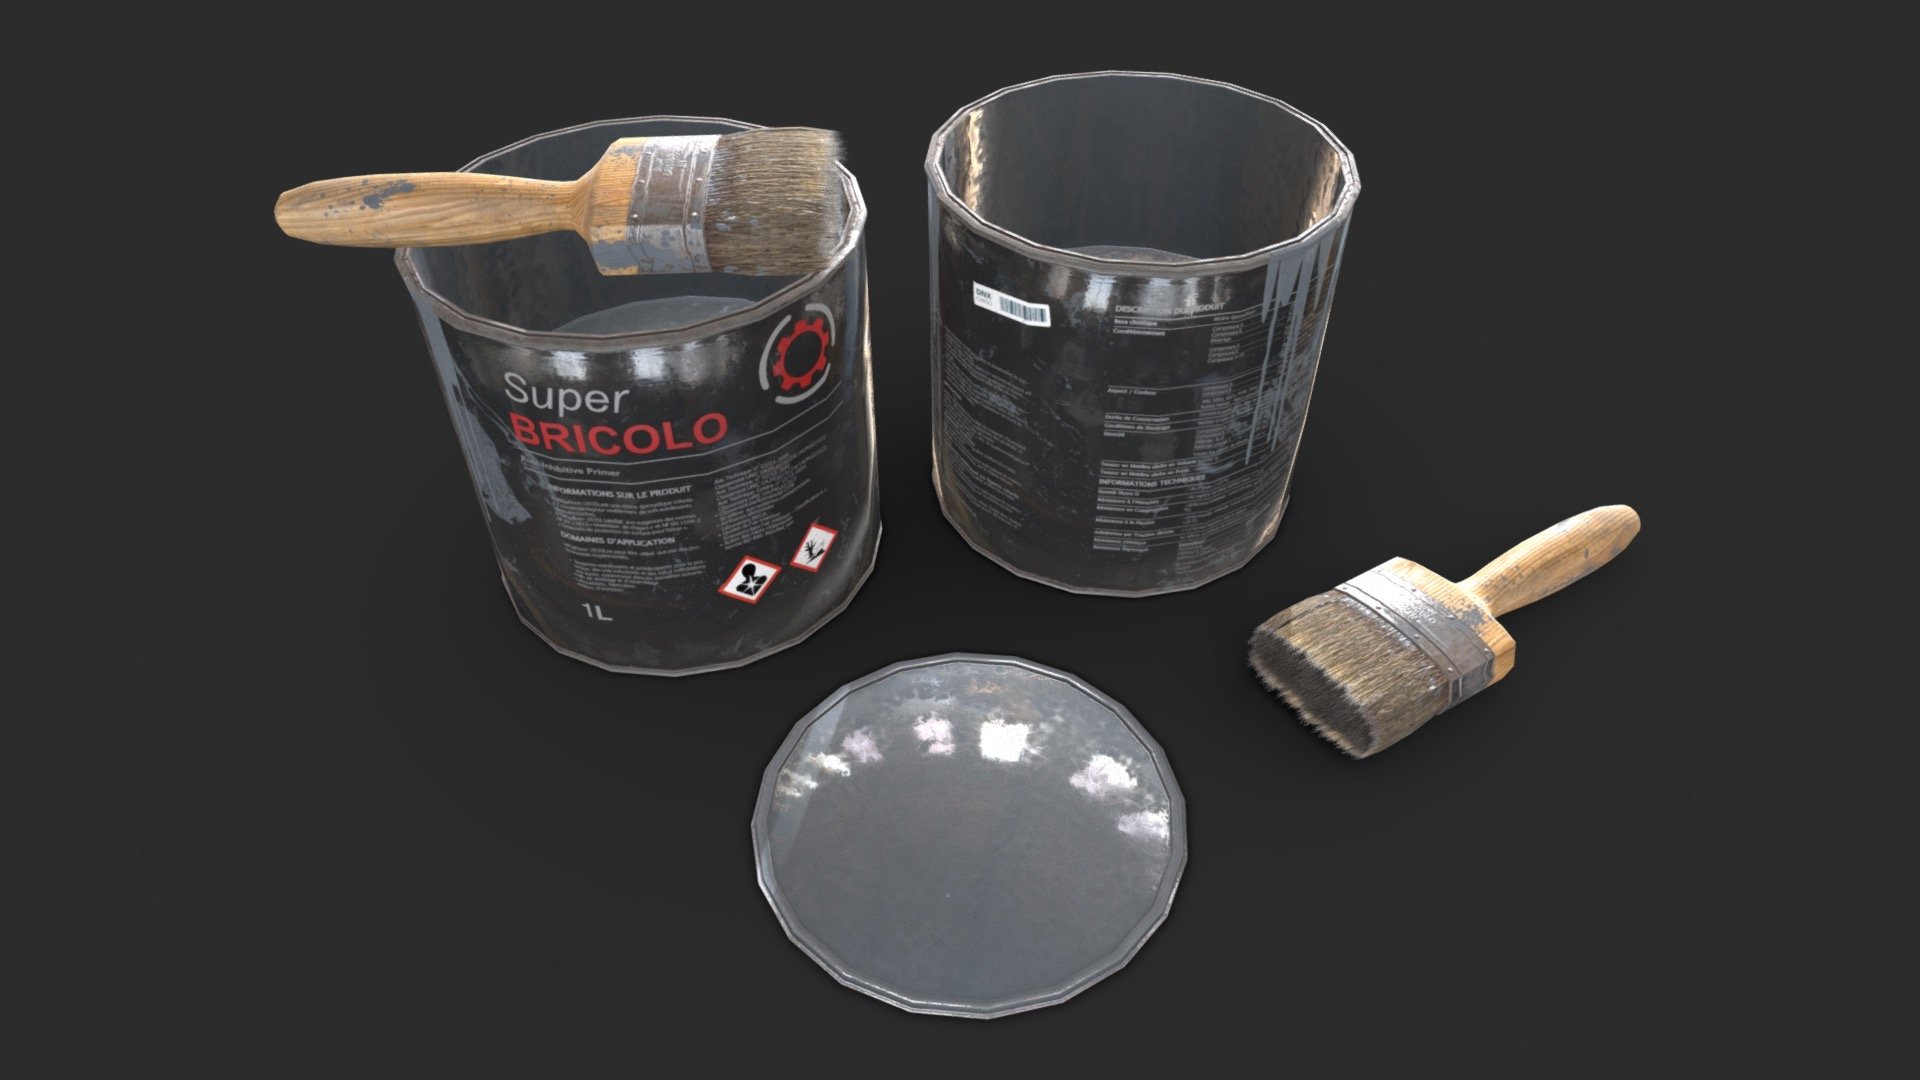 This paint bucket and brush including 3 individual objects with 3 LODs each and colliders. All elements are in realistic style and can be assembled to be used in any game (post-apo, first person shooter, construction… ). 

This AAA game asset of concrete pillars will embellish you scene and add more details which can help the gameplay and the game-design.

Low-poly model &amp; Blender native 2.93

SPECIFICATIONS




Objects : 3

Polygons : 1030

Subdivision ready : No

Render engine : Eevee (Cycles ready)

GAME SPECS




LODs : Yes (inside FBX for Unity &amp; Unreal)

Numbers of LODs : 3

Collider : Yes

Lightmap UV : No

EXPORTED FORMATS




FBX

Collada

OBJ

GLTF

TEXTURES




Materials in scene : 1

Textures sizes : 2K

Textures types : Base Color, Metallic, Roughness, Normal (DirectX &amp; OpenGL), Heigh &amp; AO (also Unity &amp; Unreal workflow maps)

Textures format : PNG

GENERAL




Real scale : Yes

Scene objects are organized by groups
 - Paint Bucket and Brush - Buy Royalty Free 3D model by KangaroOz 3D (@KangaroOz-3D) 3d model